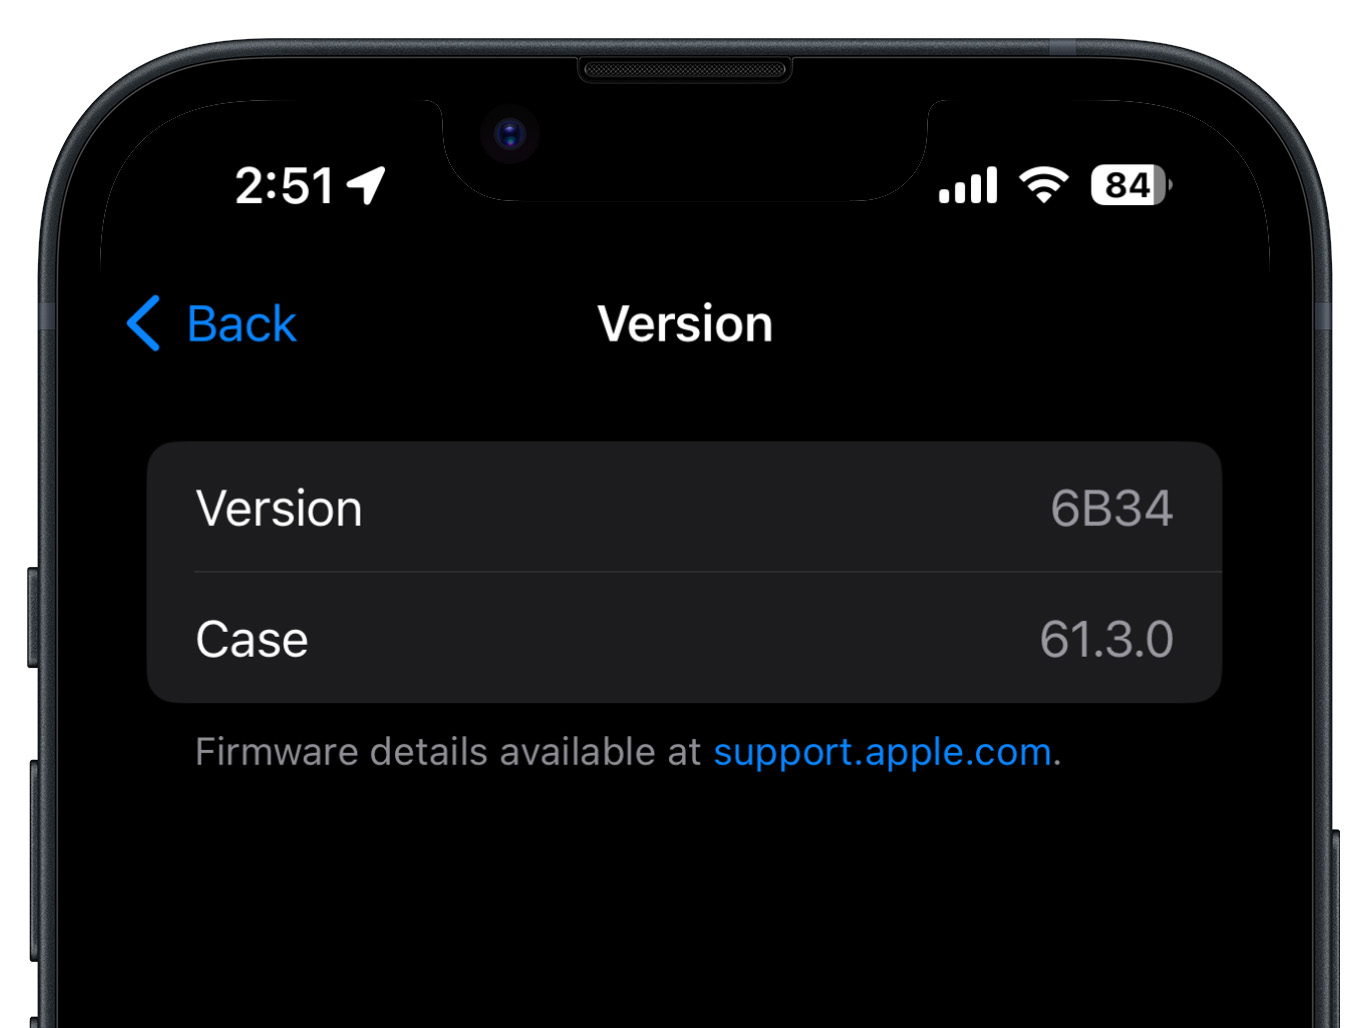 AirPods Pro firmware information on an iPhone.